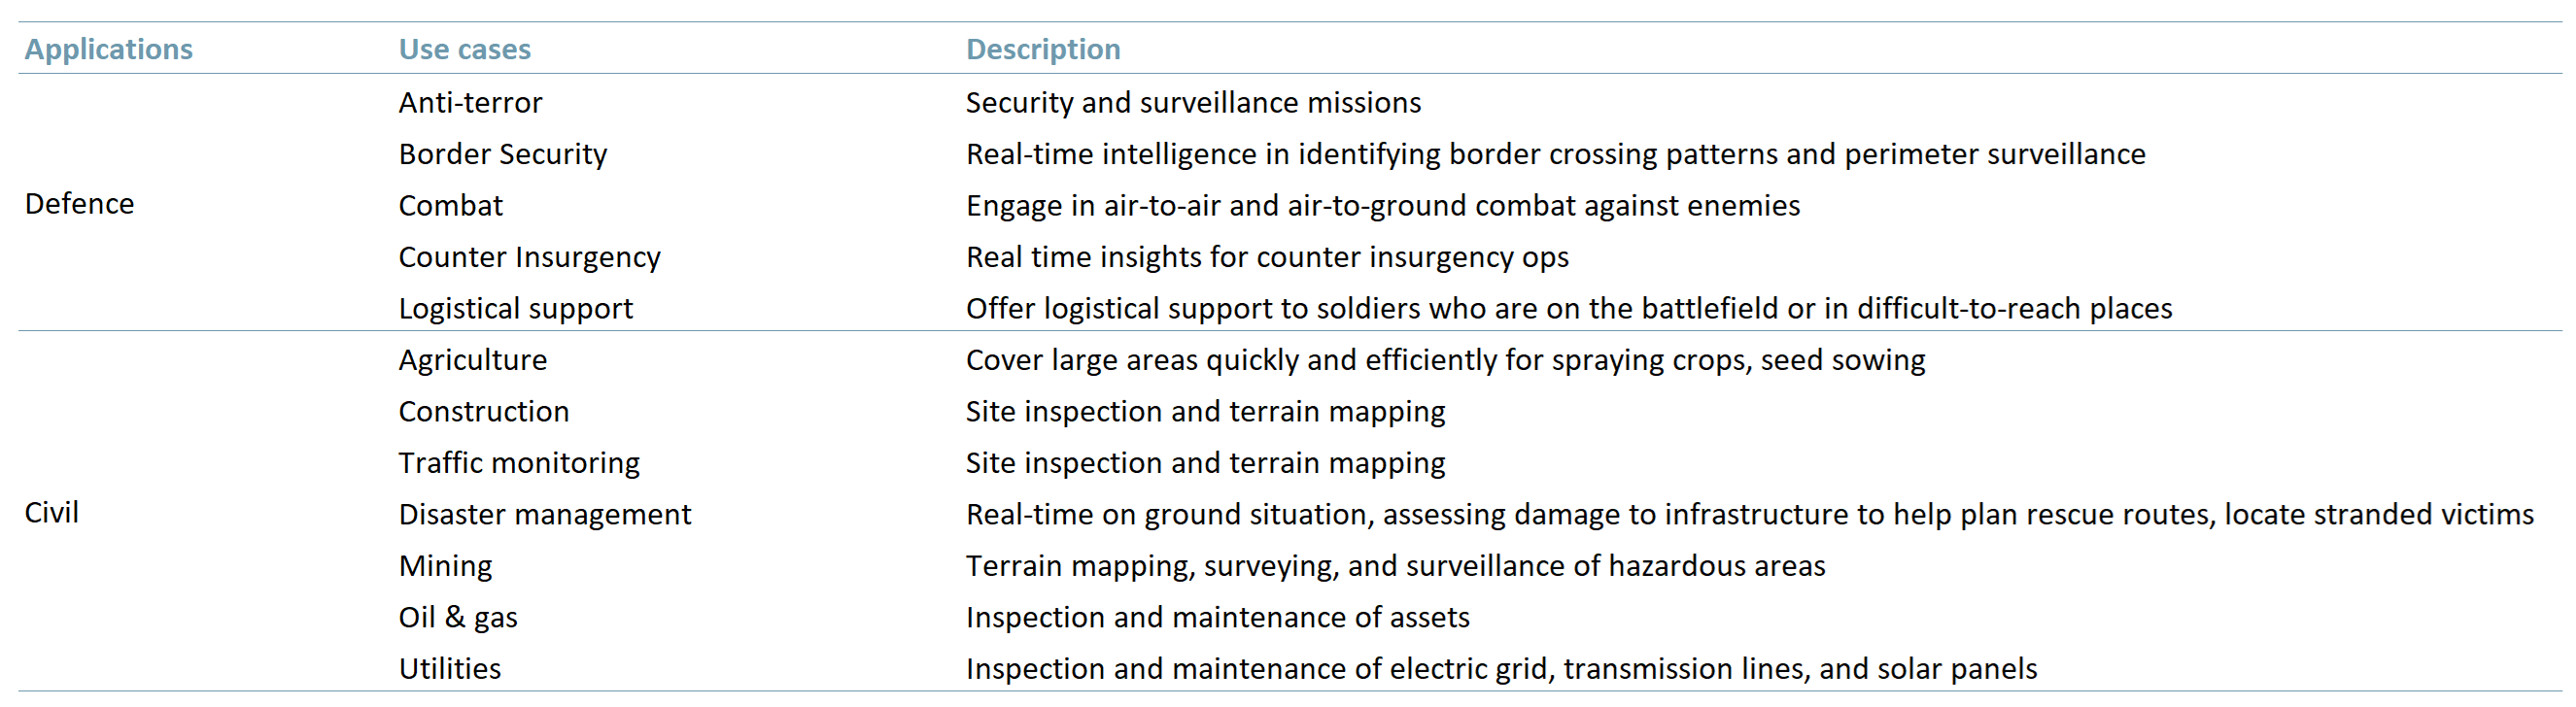 Exhibit 2 shows drone use cases